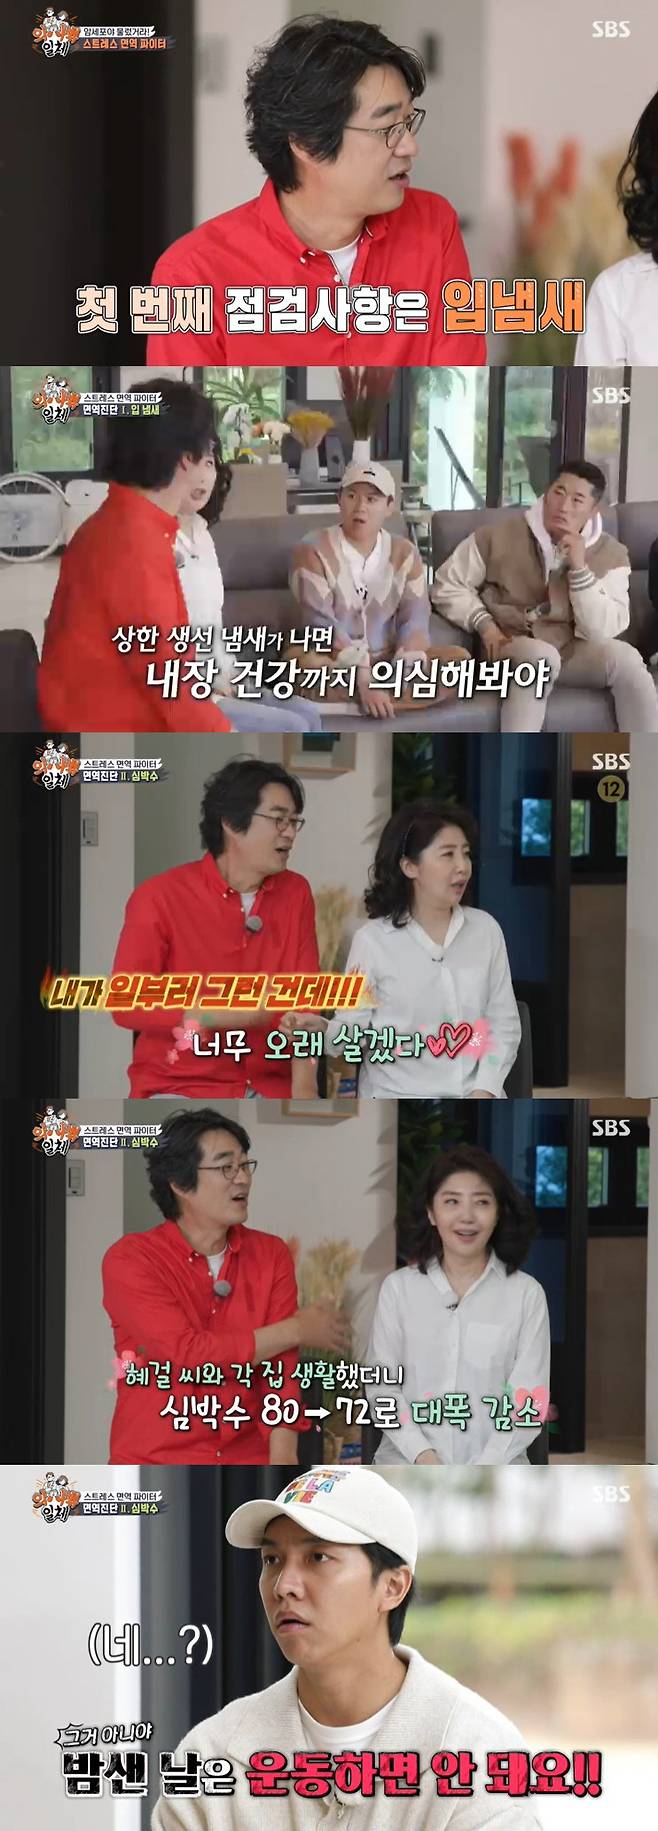 All The Butlers Hong Hye-geol Yeo Esther couple have unveiled each house life rather than each room.On the 5th, SBS entertainment program All The Butlers revealed the life of Jeju Island of the Hong Hye-geol Yeo Esther couple.The couples house, located in Jeju Island, was located in a beautiful landscape that would appear in the advertisement.The couple boasted of their extraordinary chemistry, starting with their introduction.Yeo Esther said that in Seoul, Hong Hye-geol is down to Jeju Island and Husband has set up a house in Jeju Island for health.From housing to Madang Interiors, all of them were touched by Hong Hye-geol.Hong Hye-geol said he planted it because of the broadcast about the reed in Madang, and Yeo Esther also  (Hong Hye-geol) dug it up because All The Butlers is coming.I brought all the luggage in Seoul, Disclosure said.The couples house was set up a bit but boasted a neat panoramic view and interiors; the first floor was the space of Hong Hye-geol and the second floor was the space of Yeo Esther.There was also a self-defense axe that was actually used next to Hong Hye-geols bedThe space on the second floor Yeo Esther was open to the pool on the terrace.Unlike the space of Hong Hye-geol, which was a modern interior, Yeo Esthers space was cozy.Yeo Esther uses a body-filled for waist health, saying, If you lie on the left side and sleep, you will have less pressure on your heart.On the reason why I brought all the soul luggage for All The Butlers, Hong Hye-geol said, There was a rumor that I was taken by my wife and went to Jeju Island.I did not want to see a man living alone, so I decorated it with a gorgeous look. As for the reason why the couple use the house separately, I decided to maintain a friendliness indifference because of health.I thought it would be better to live separately for each others Immunity as Menopausal came to each other. Two people who said that their minds were stable and healthy after living separately.Hong Hye-geol said: My wife also has a lot of chronic illnesses - brain aneurysms, asthma and depression.I also have discs, tuberculosis, and liver Kwon Yuri shade just before lung cancer, said Yeo Esther, dont think serious: we Husband lung cancer hijack.It is not lung cancer, but it is called lung cancer. Hong Hye-geol said: The reason I came to Jeju Island was that I had a strange lung during a health checkup, which is the Kwon Yuri shade.Its two centimeters long, and when you take it off, its more than 99% cancerous cells. But sometimes its not like cancer.I posted this on SNS and it was said that I had lung cancer, so it became a national irrigation.I feel comfortable, she said.The couple decided to tell the members of All The Butlers and how to keep health from cancer for viewers.Yeo Esther said: Men start to get sick from 45, and women become rapidly ill after menopause at 55.It is because of one age even if there is no hypertension, diabetes, or cholesterol. When Immunity is weakened, it should be especially careful about health management.He also emphasized that redness, severe sebum, and dandruff are signs of stress, and that it should not be left unattended.Lee Seung-gi said he often develops inflammation on the neck and scalp, so Yeo Esther said, Did you drink yesterday?Was the snack meat? and Lee Seung-gi was surprised and said nothing. Yeo Esther said, Drinking makes inflammation worse.The saturated fat of the marbling of meat is inflammation, he said. Origin should also be careful that there is saturated fat.The couple decided to diagnose the members immunity in a simple way. The first was the breath. Hong Hye-geol said, If you are stressed, you will get drier.Then, inflammation occurs in the mouth. It is a bad cause of bad breath. The smell of the breath is particularly sensitive to overwork and varies depending on the condition.Yeo Esther recommended a way to tape people who sleep with their mouths open, saying, It is less odorous to have enough saliva.Another indicator is heart rate measurements; Hong Hye-geol, in Kim Dong-Hyun, whose pulse has run nine times in 10 seconds, said: Its serious. Is it only nine?Is it right to count properly? Yeo Esther admired I will live too long .I did it on purpose, I dont have this broadcast sense, Hong Hye-geol said, frustrated as Yeo Esther stepped in.The slower the heart, the better. The quicker the pulse is a sign that you are not in good shape, Yeo Esther said.The couple recommended high-intensity Exercise as a way to lower their pulses, and the members said Lee Seung-gi does Exercise every day even after the night.Yeo Esther then said, Night days are Exercise and not; excessive days should rest Exercise.